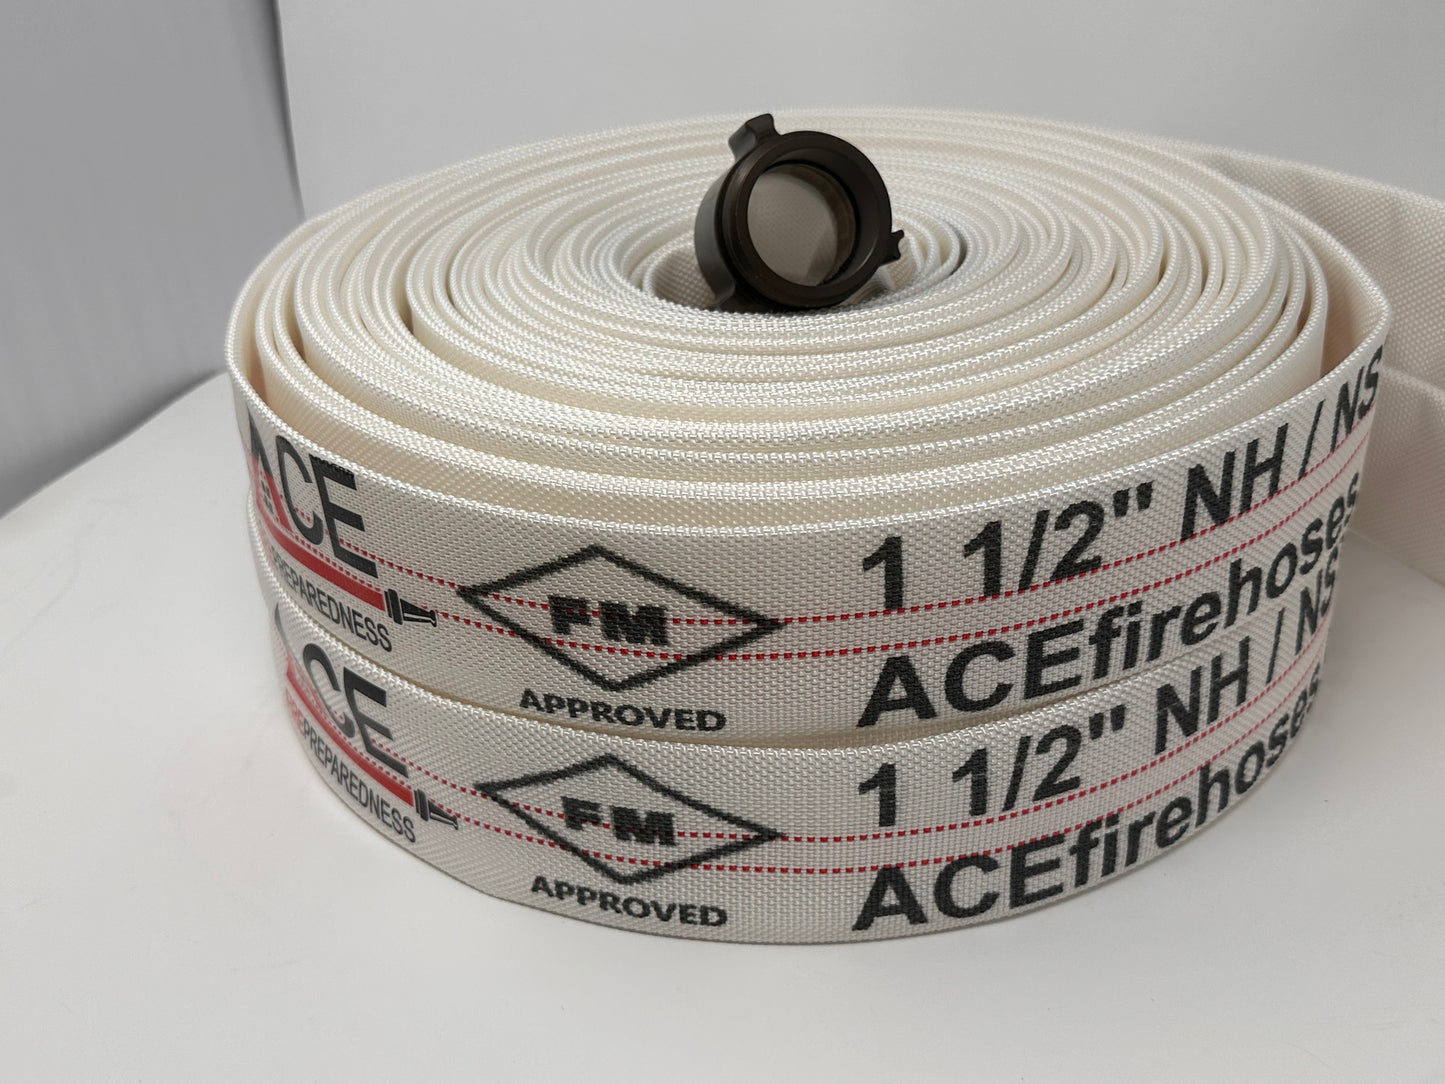 Home Defense Fire Hose 75’ x 1.5”  (2 pack) NH Aluminum Couplings, TPU Lining, FM Approved for occupant use.